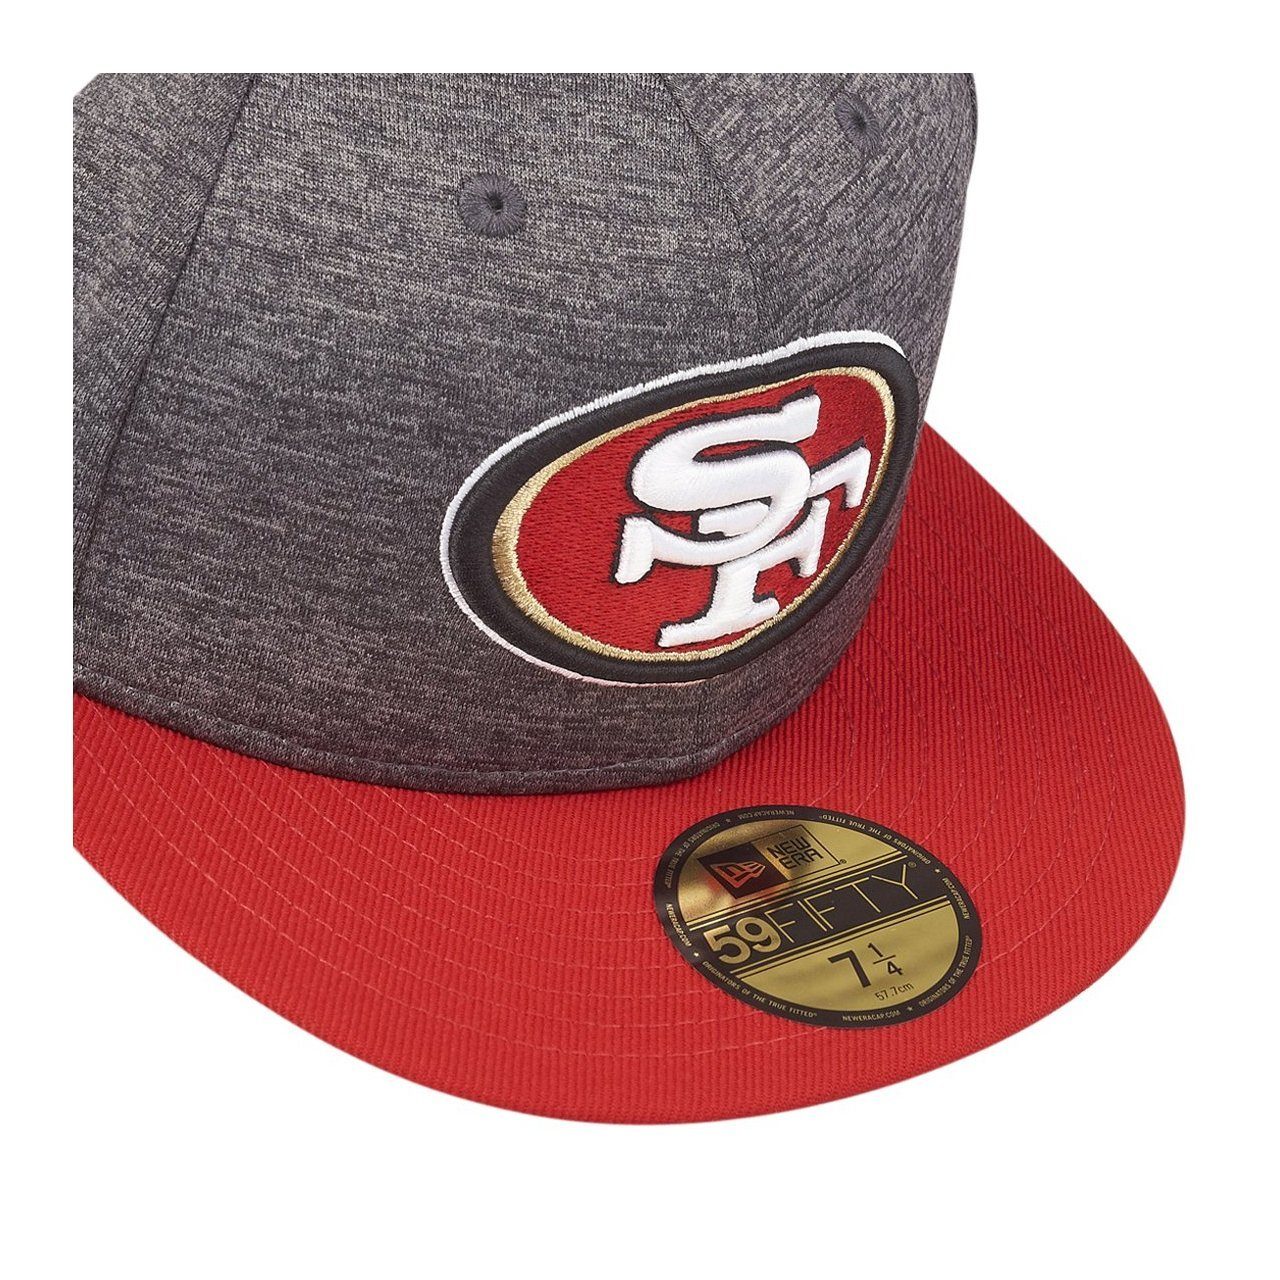 SHADOW New 49ers TECH Fitted San Cap Francisco 59Fifty Era